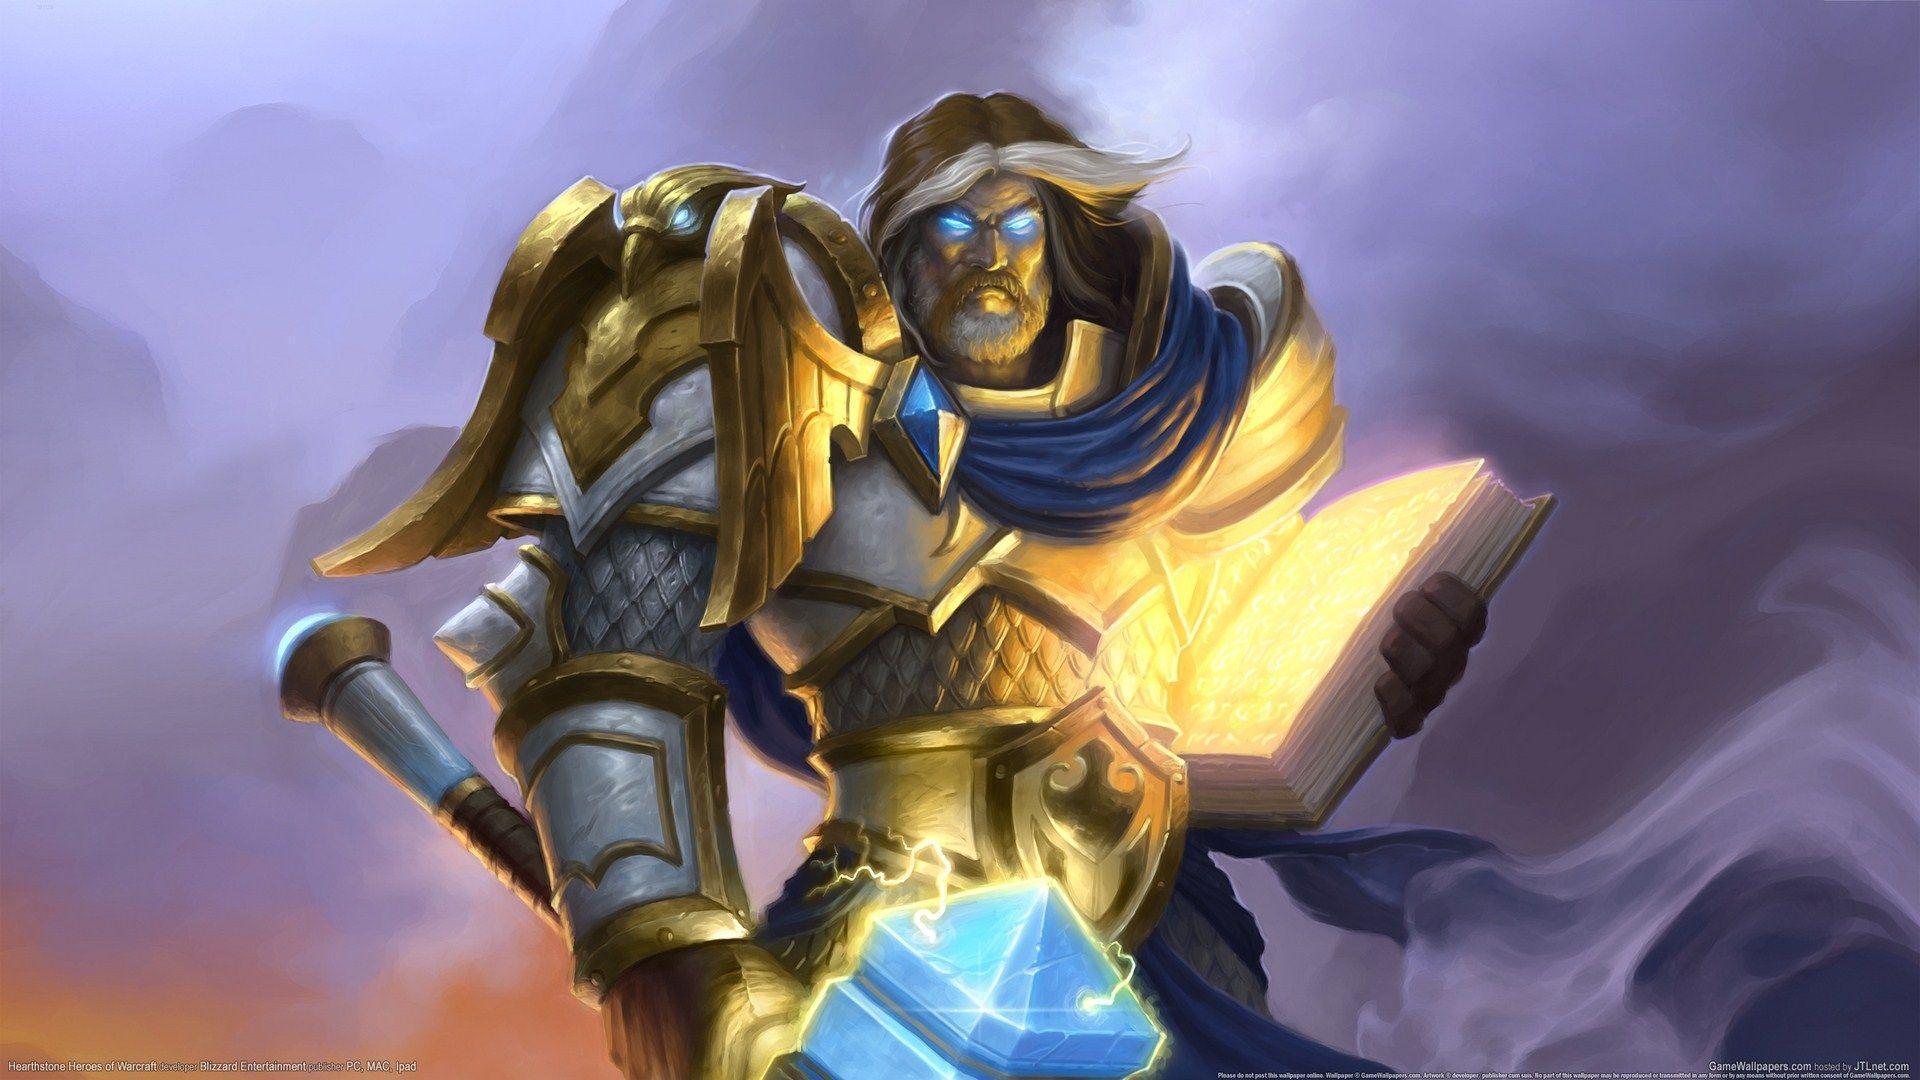 Download Wallpaper 1920x1080 Paladin, Hearthstone, Uther Full HD